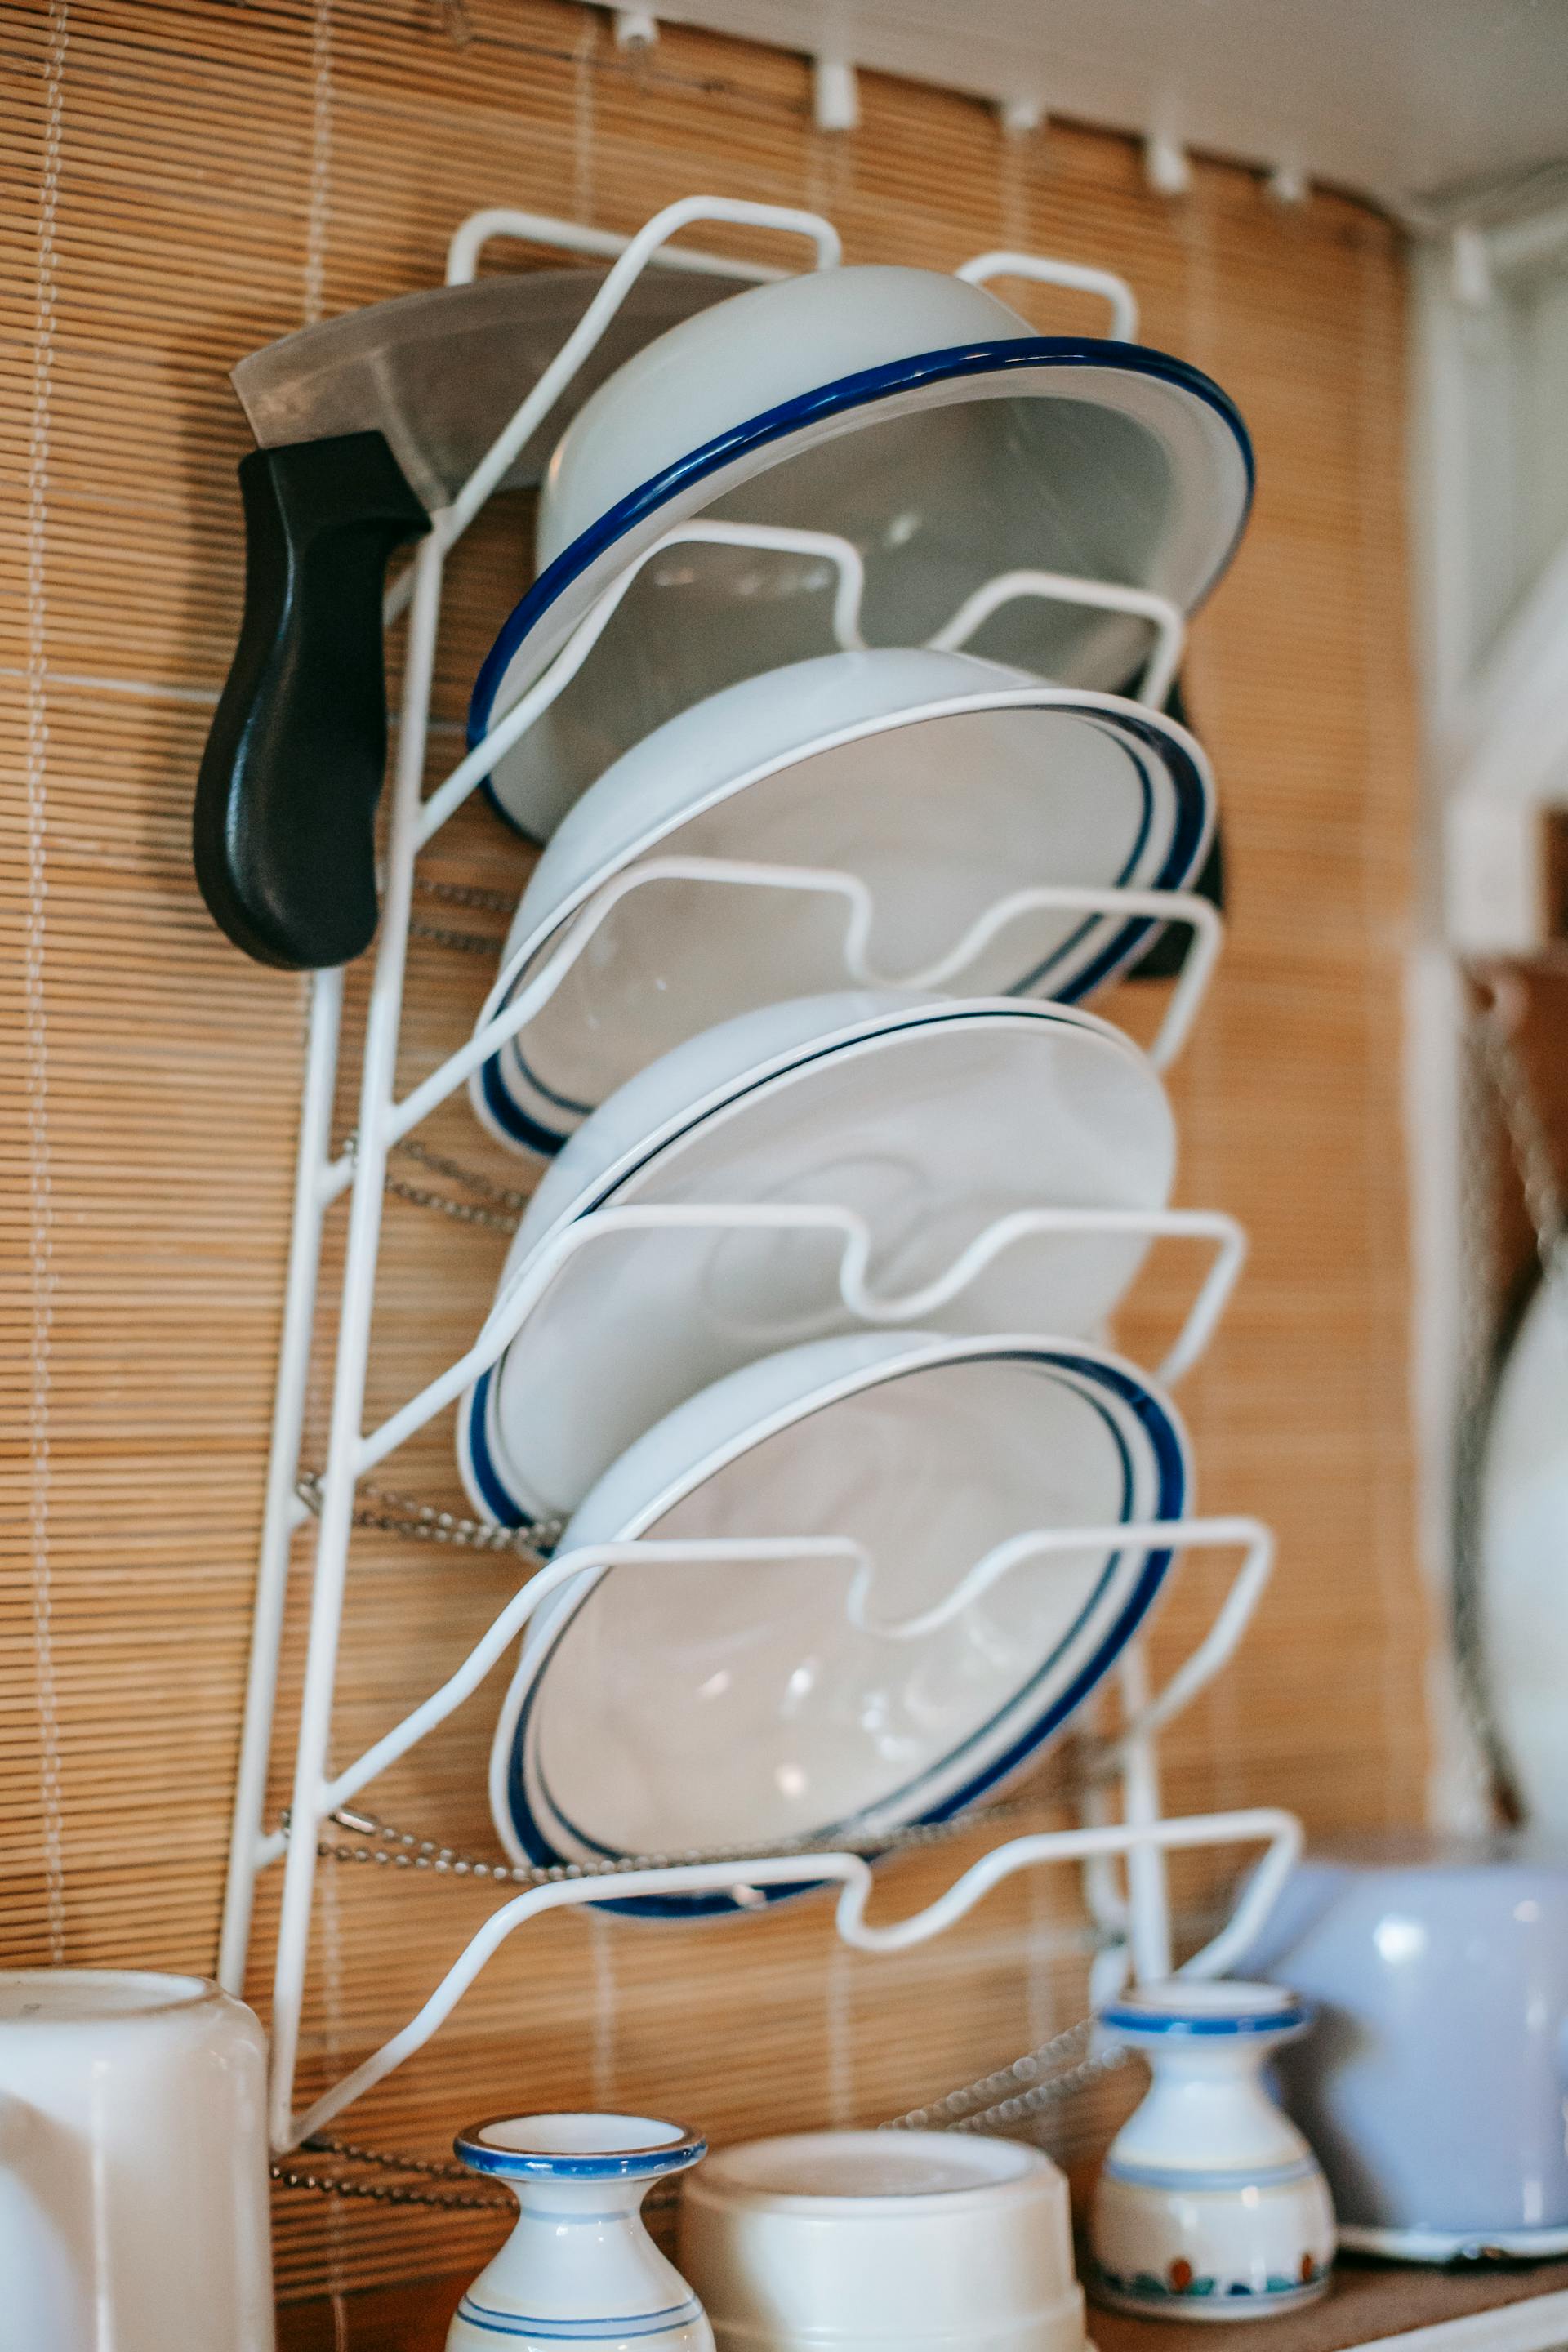 A wall plate rack with ceramic plates in a kitchen | Source: Pexels